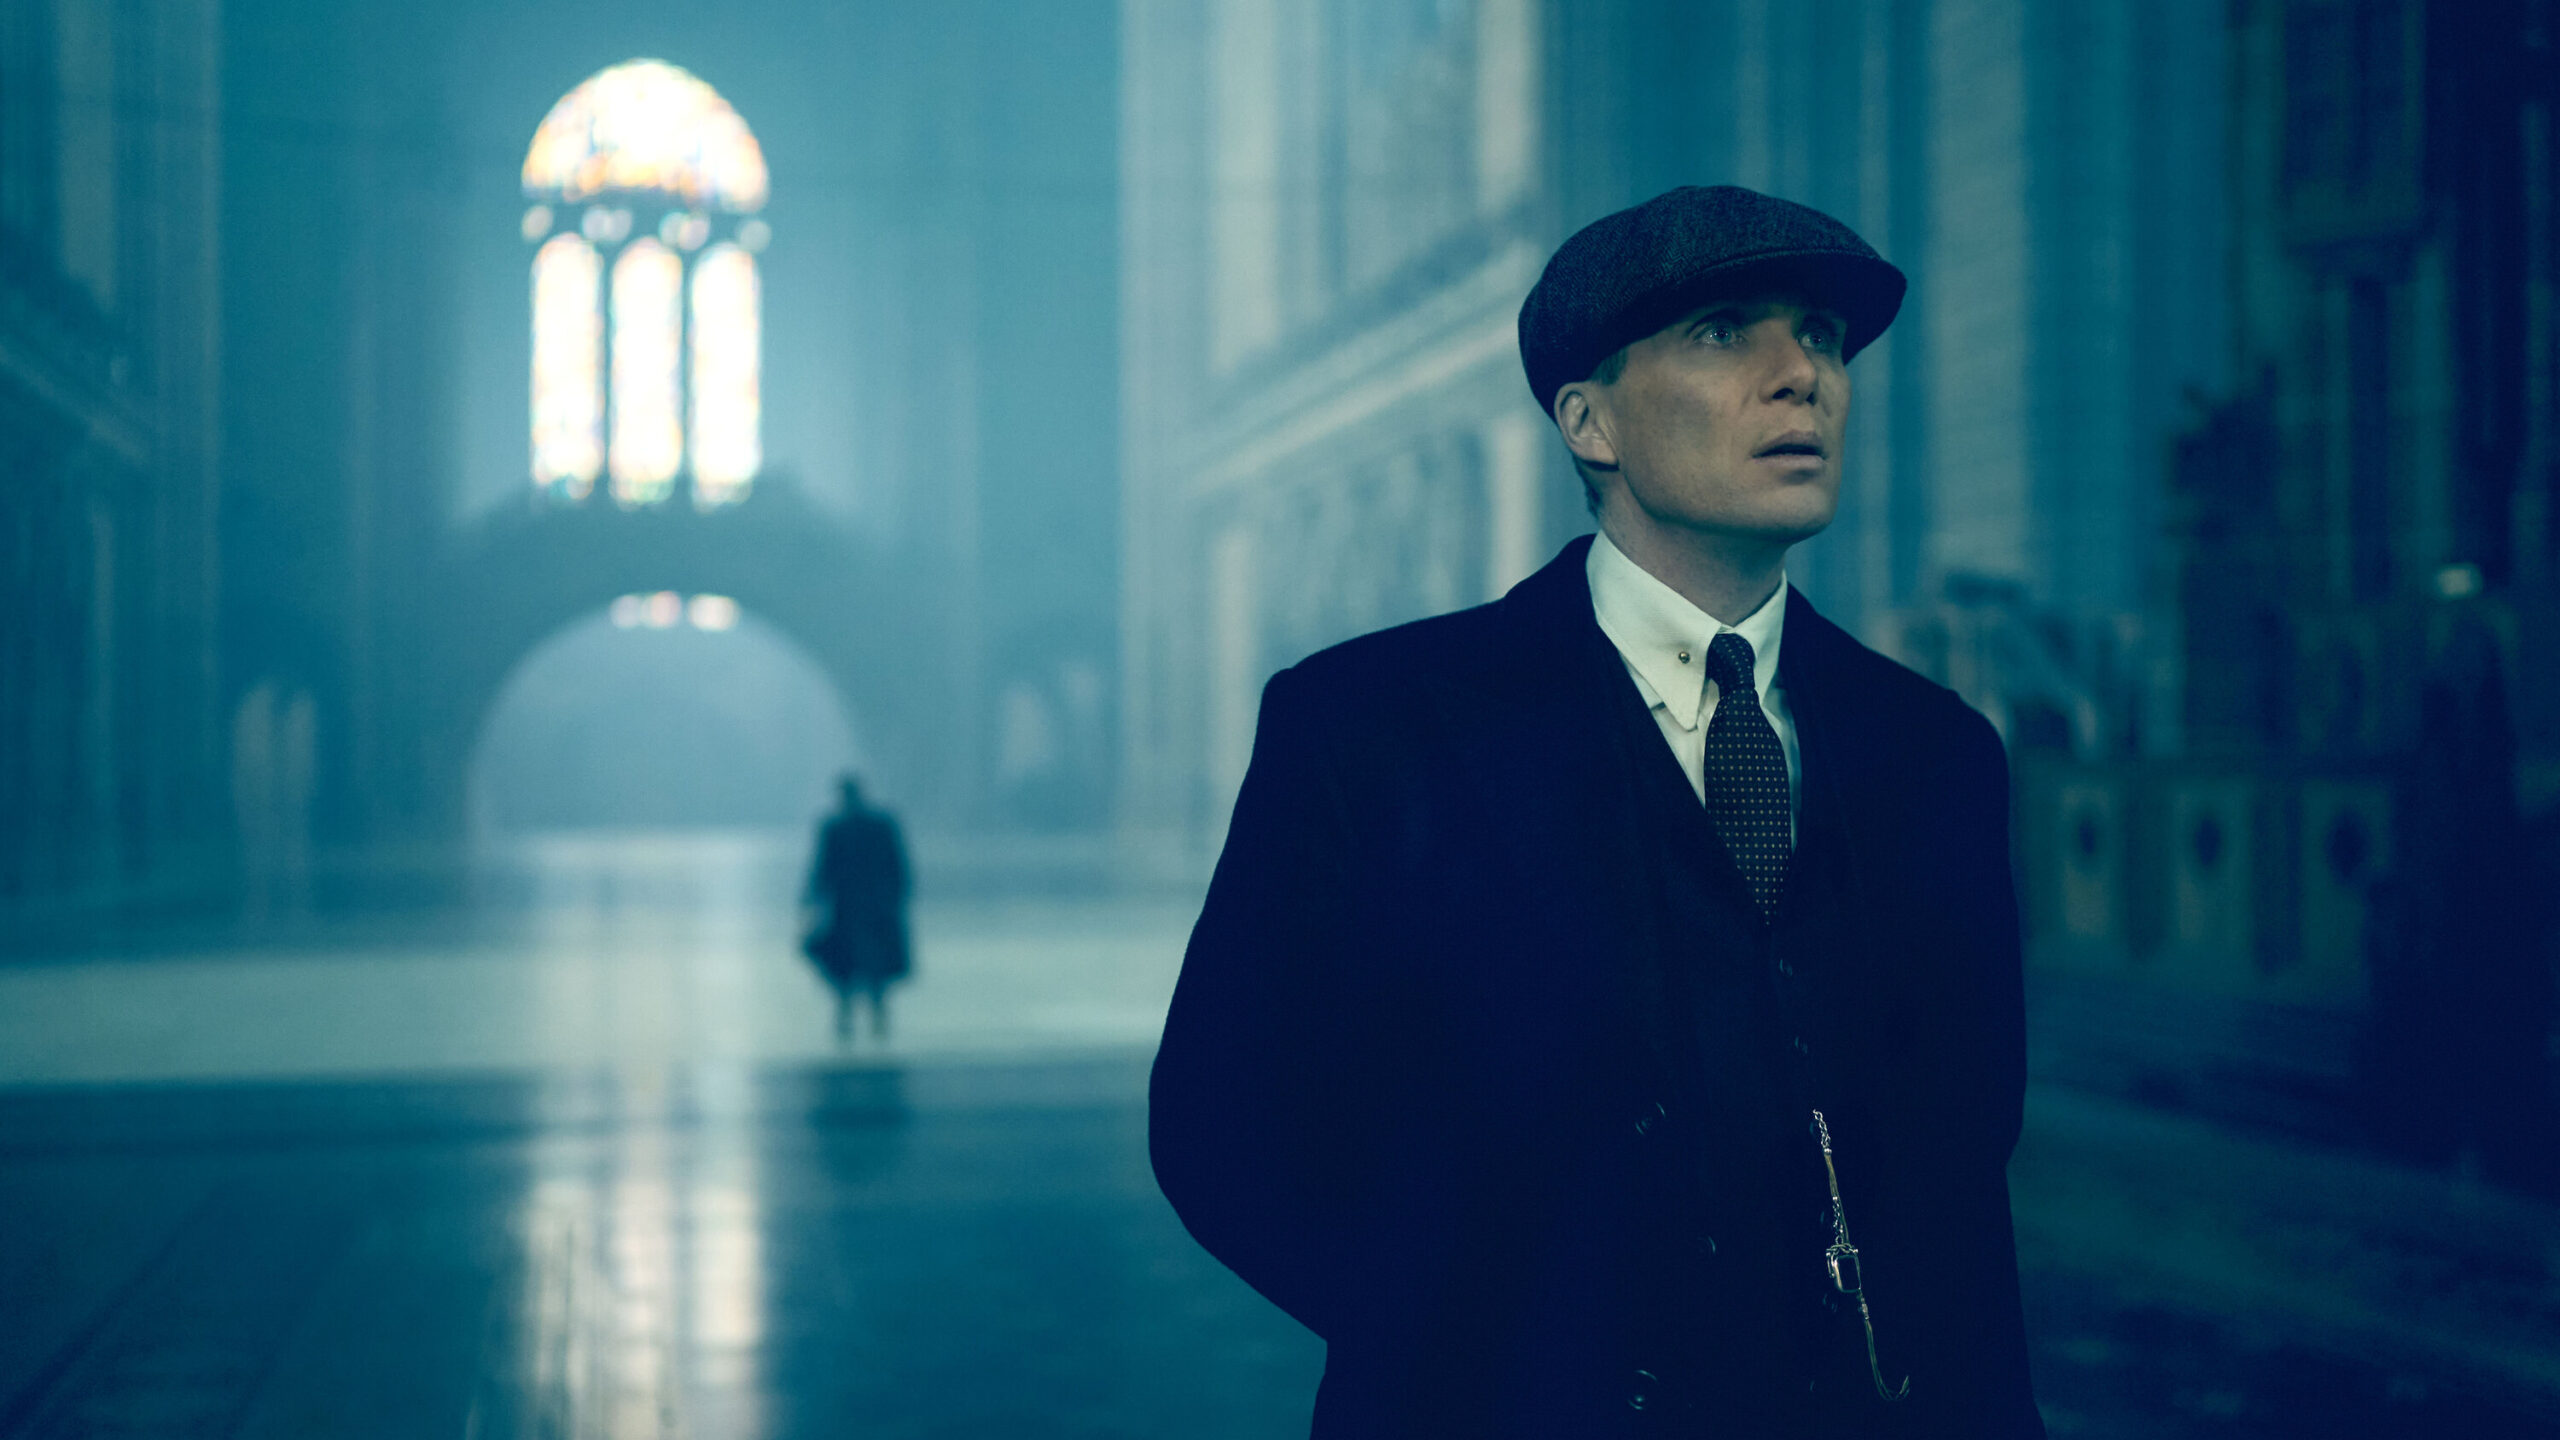 Cillian Murphy says he's 'open' to a 'Peaky Blinders' movie - ABC News